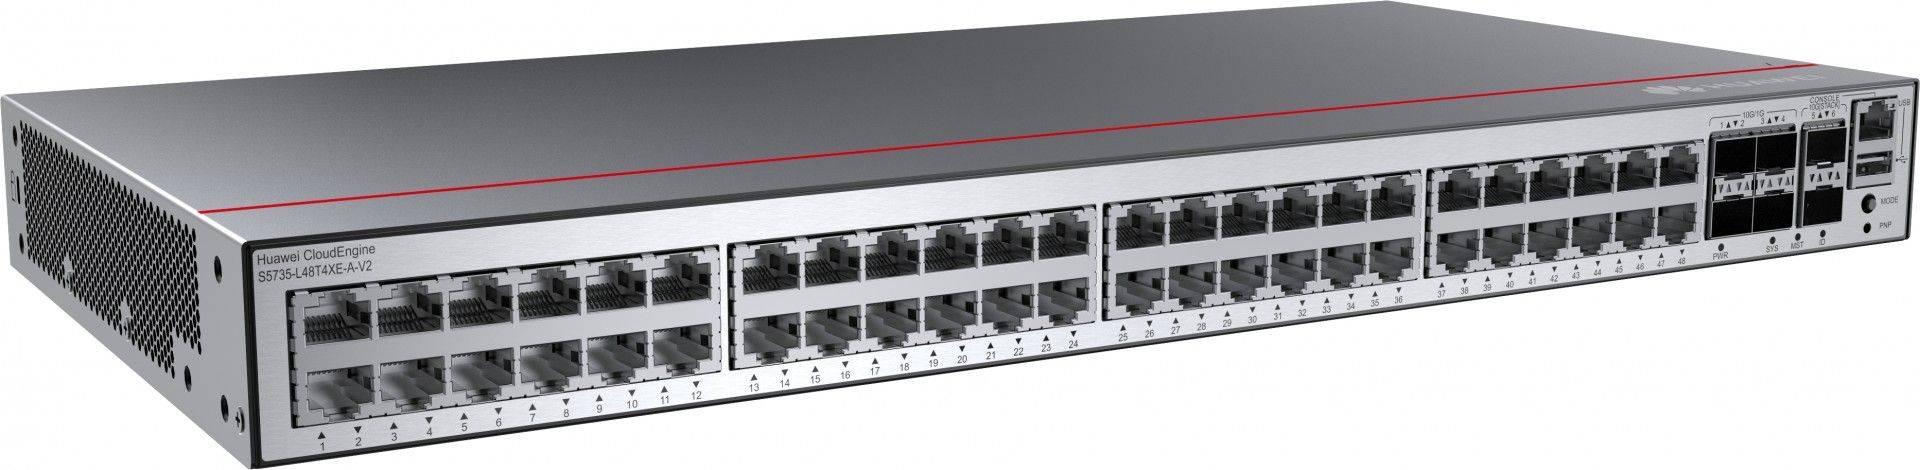 Huawei Switch S5735-L48T4XE-A-V2 (48*GE ports, 4*10GE SFP+ ports, 2*12GE stack ports, AC power) + license L-MLIC-S57L (98012040)_2